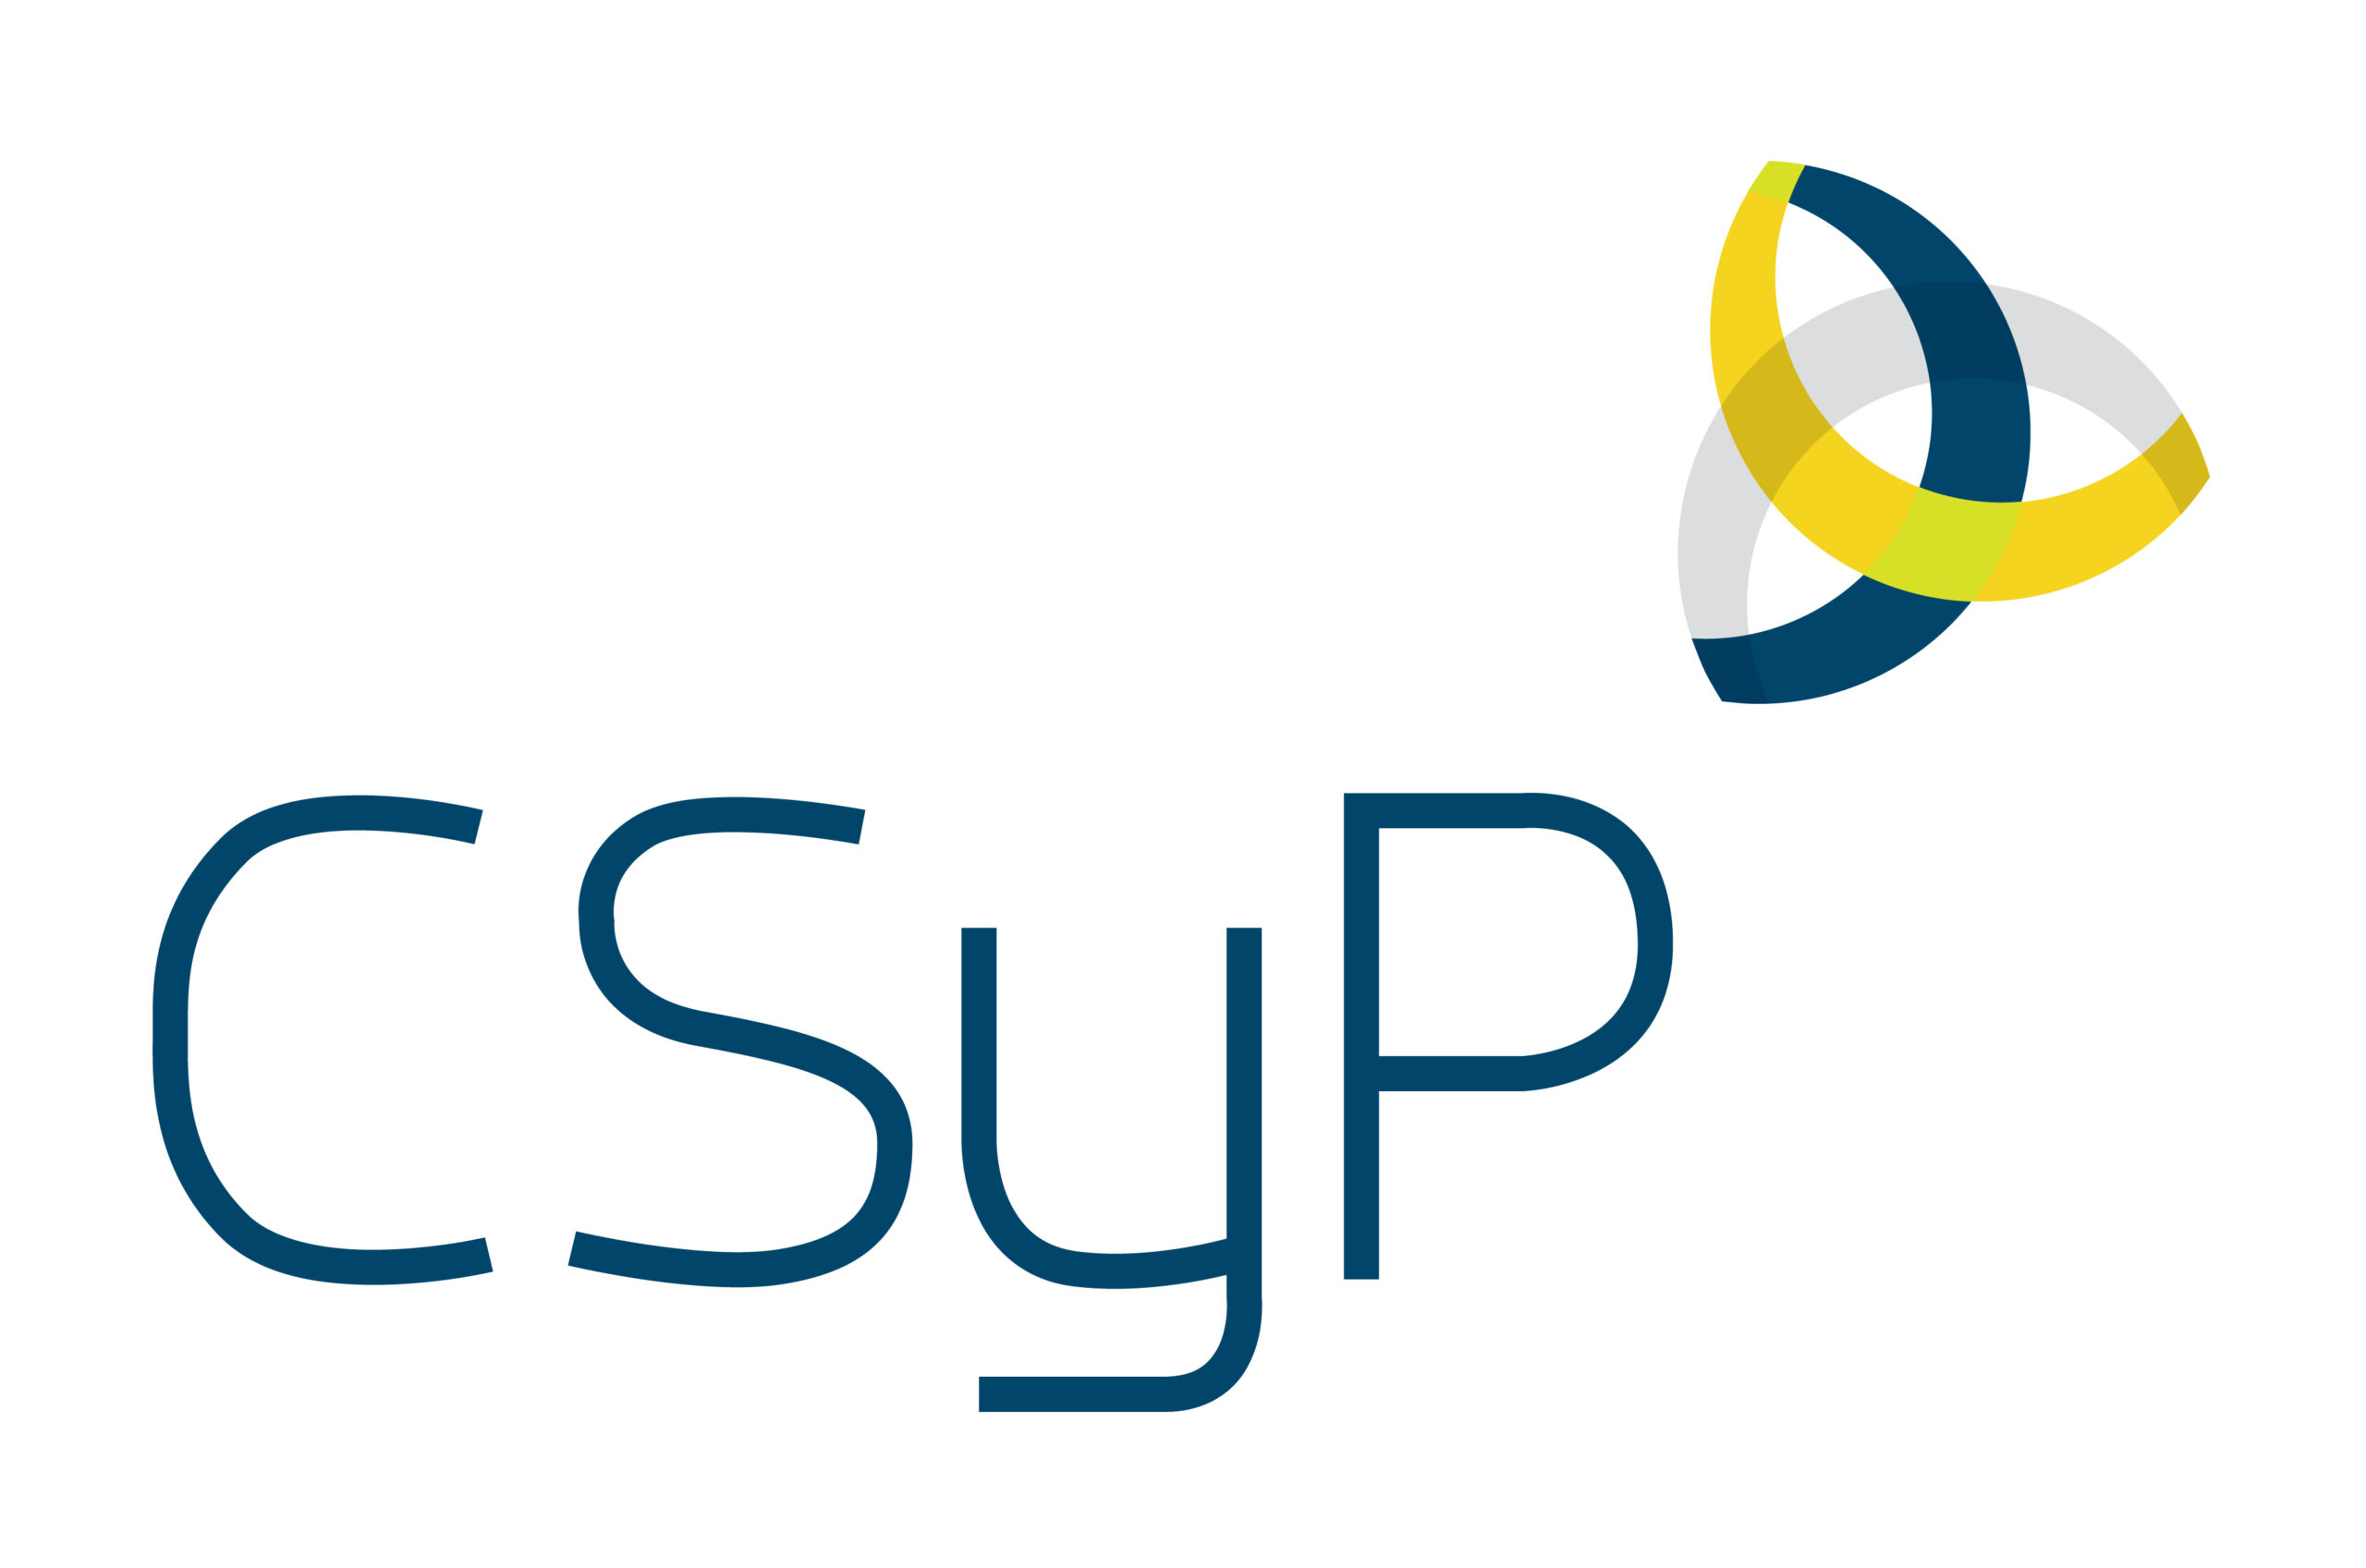 CSyP LOGO scaled Terms & Conditions